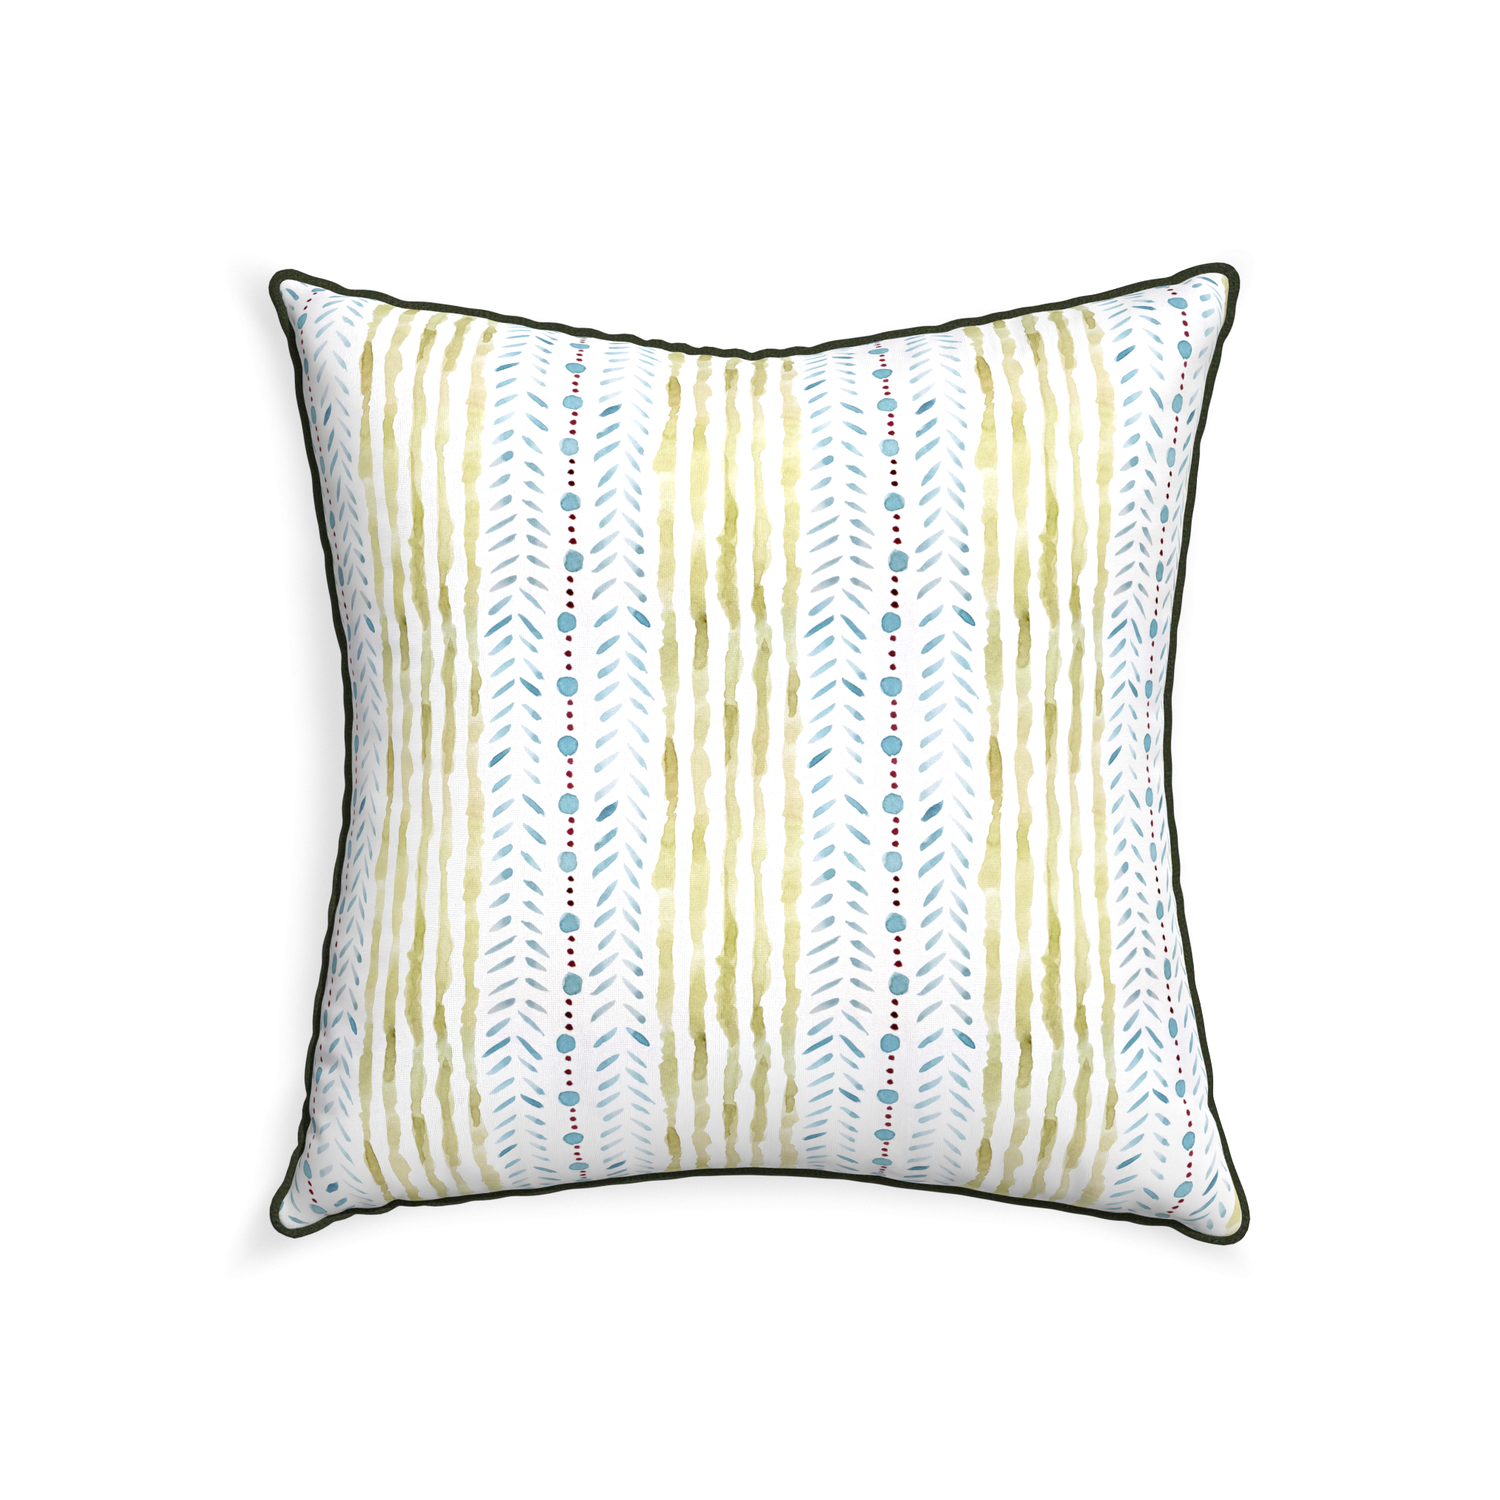 22-square julia custom blue & green stripedpillow with f piping on white background